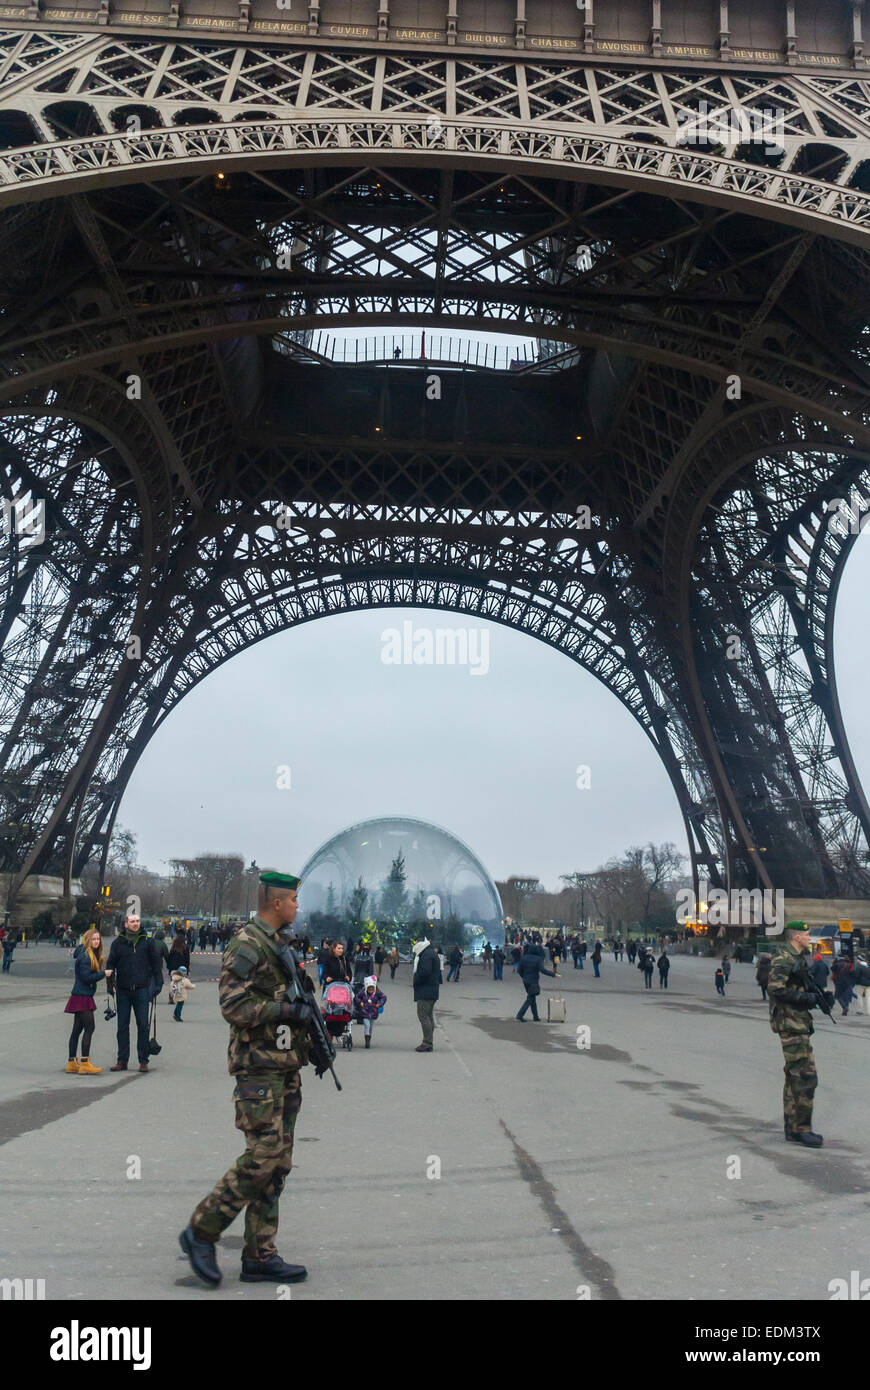 Paris, France. Security measures against terrorism after shooting attacks on French Newspaper, 'Charlie Hebdo' 'Eiffel Tower' Soldiers Patrolling on Street Stock Photo